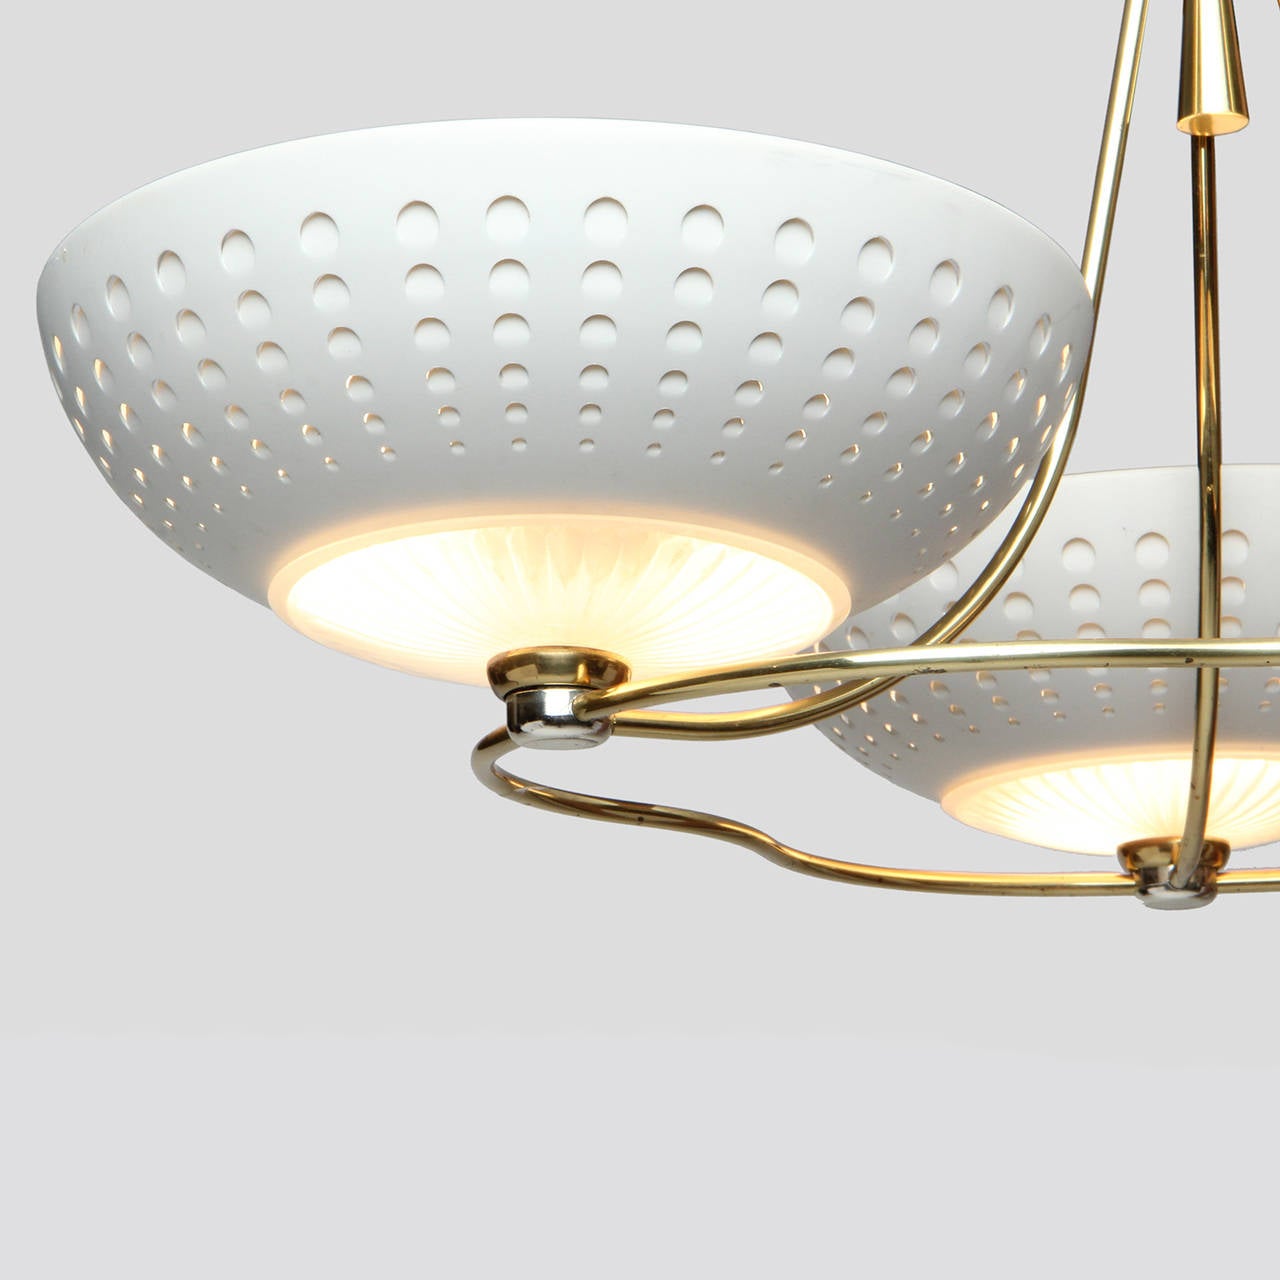 An interesting, beautifully proportioned and finely detailed chandelier having an expressive and sculptural lacquered brass armature supporting three cream lacquered and perforated uplights.